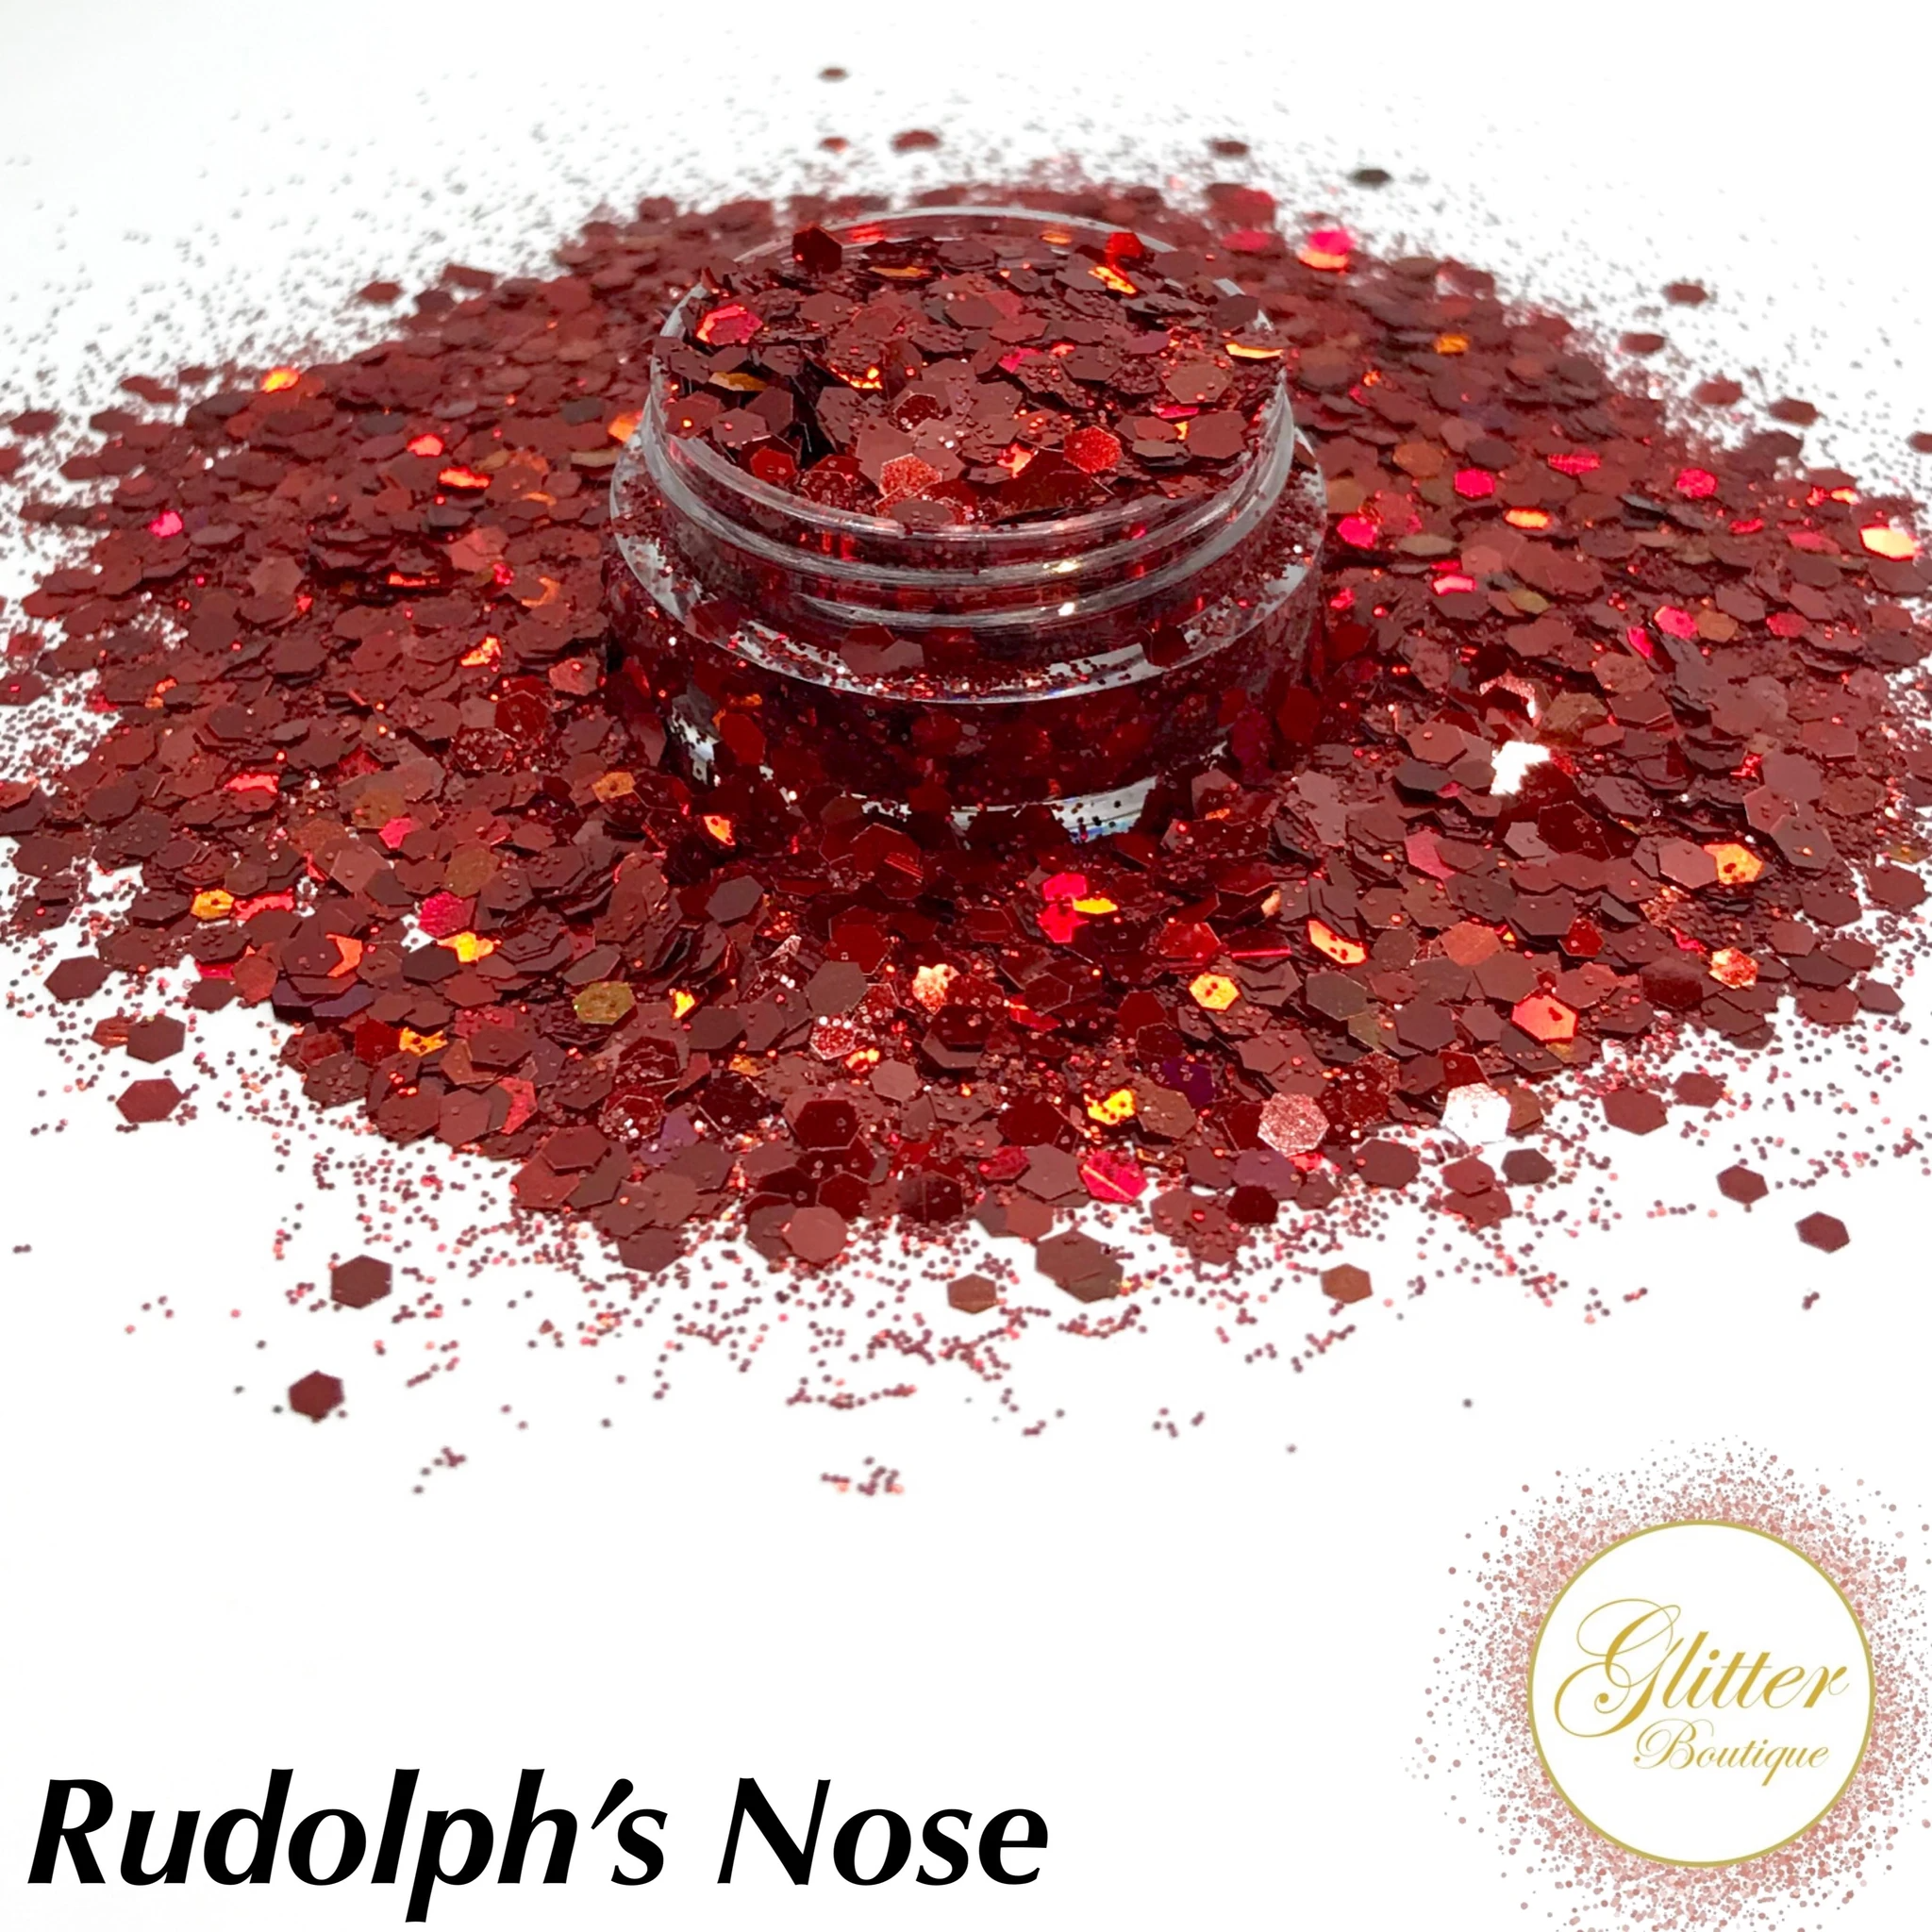 Glitter Boutique - Rudolph's Nose - Creata Beauty - Professional Beauty Products